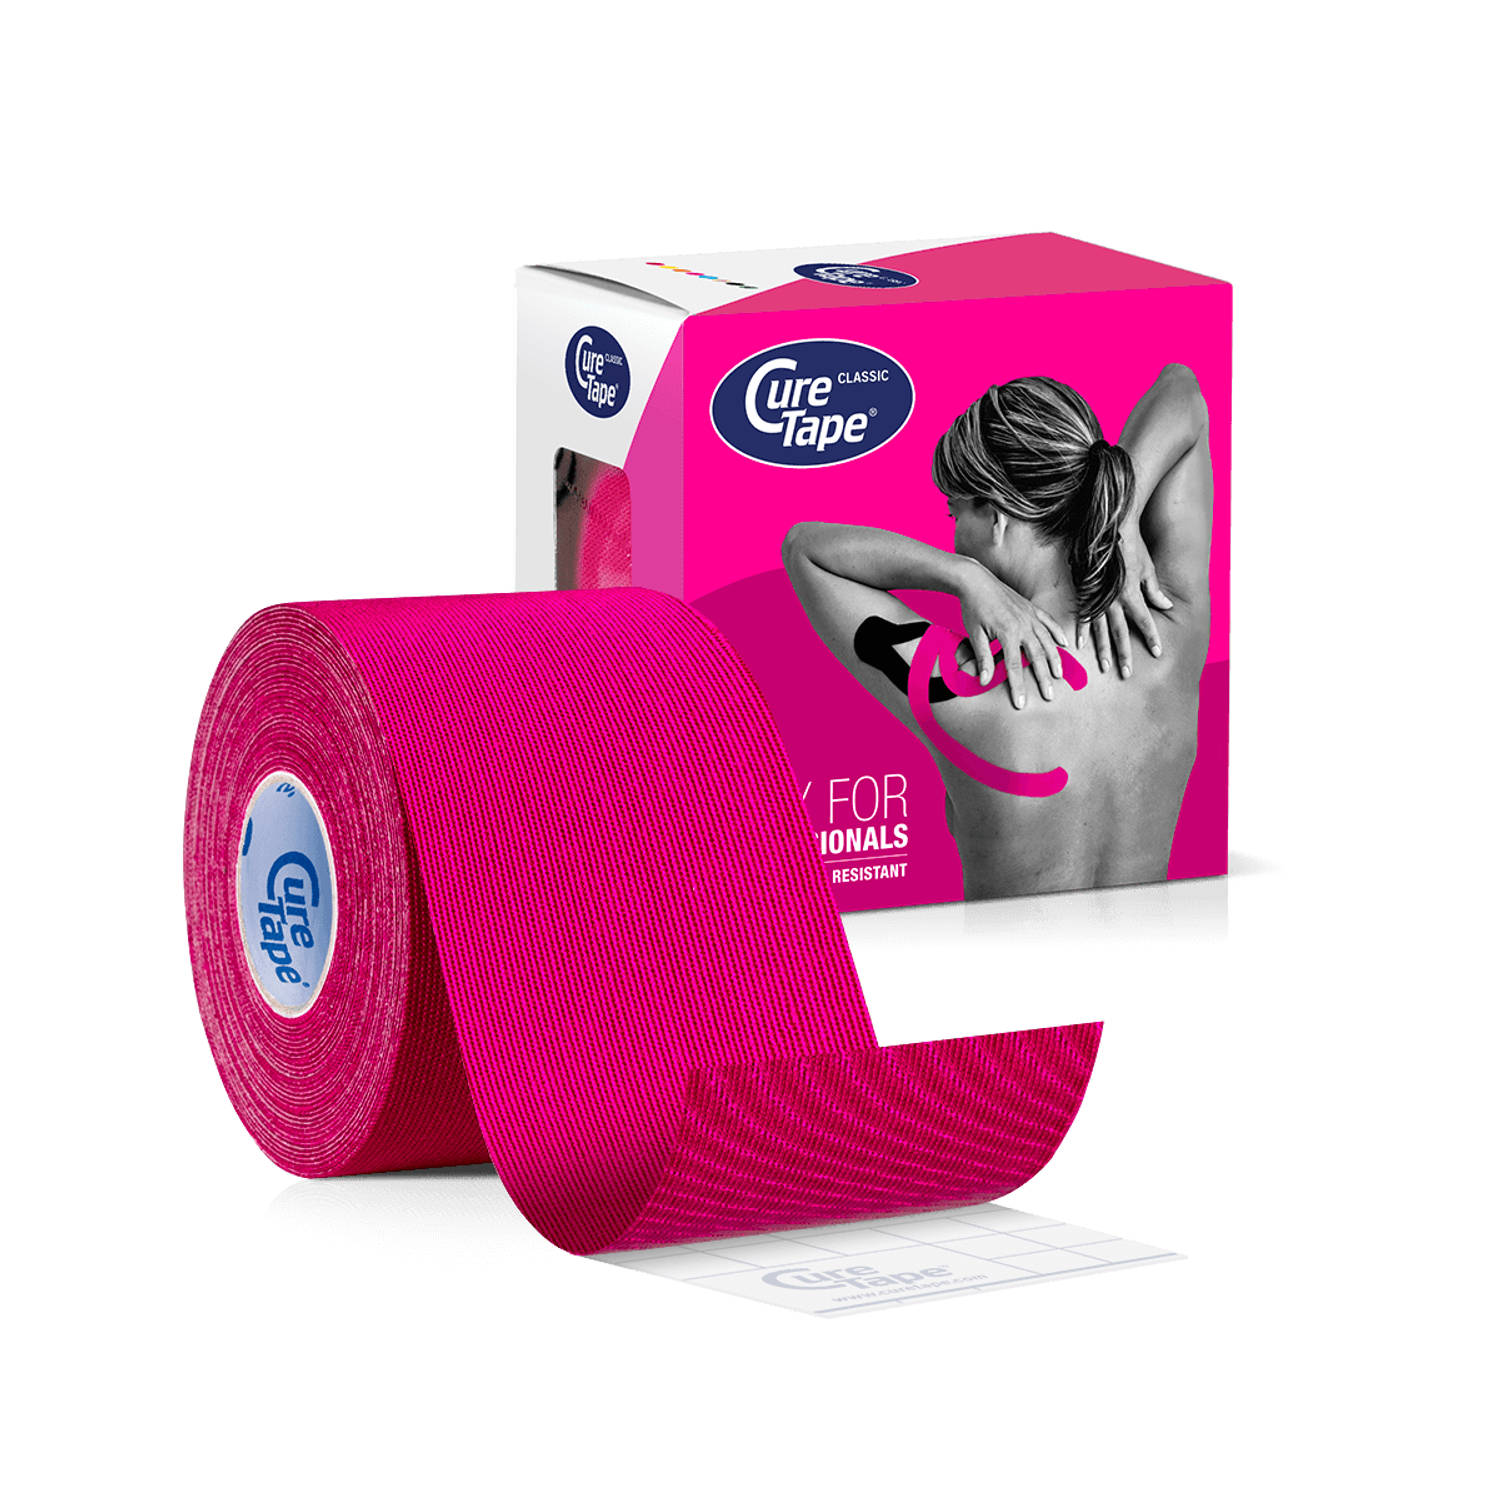 Cure Tape 5cm X 5mtr Rood-rose 1rol